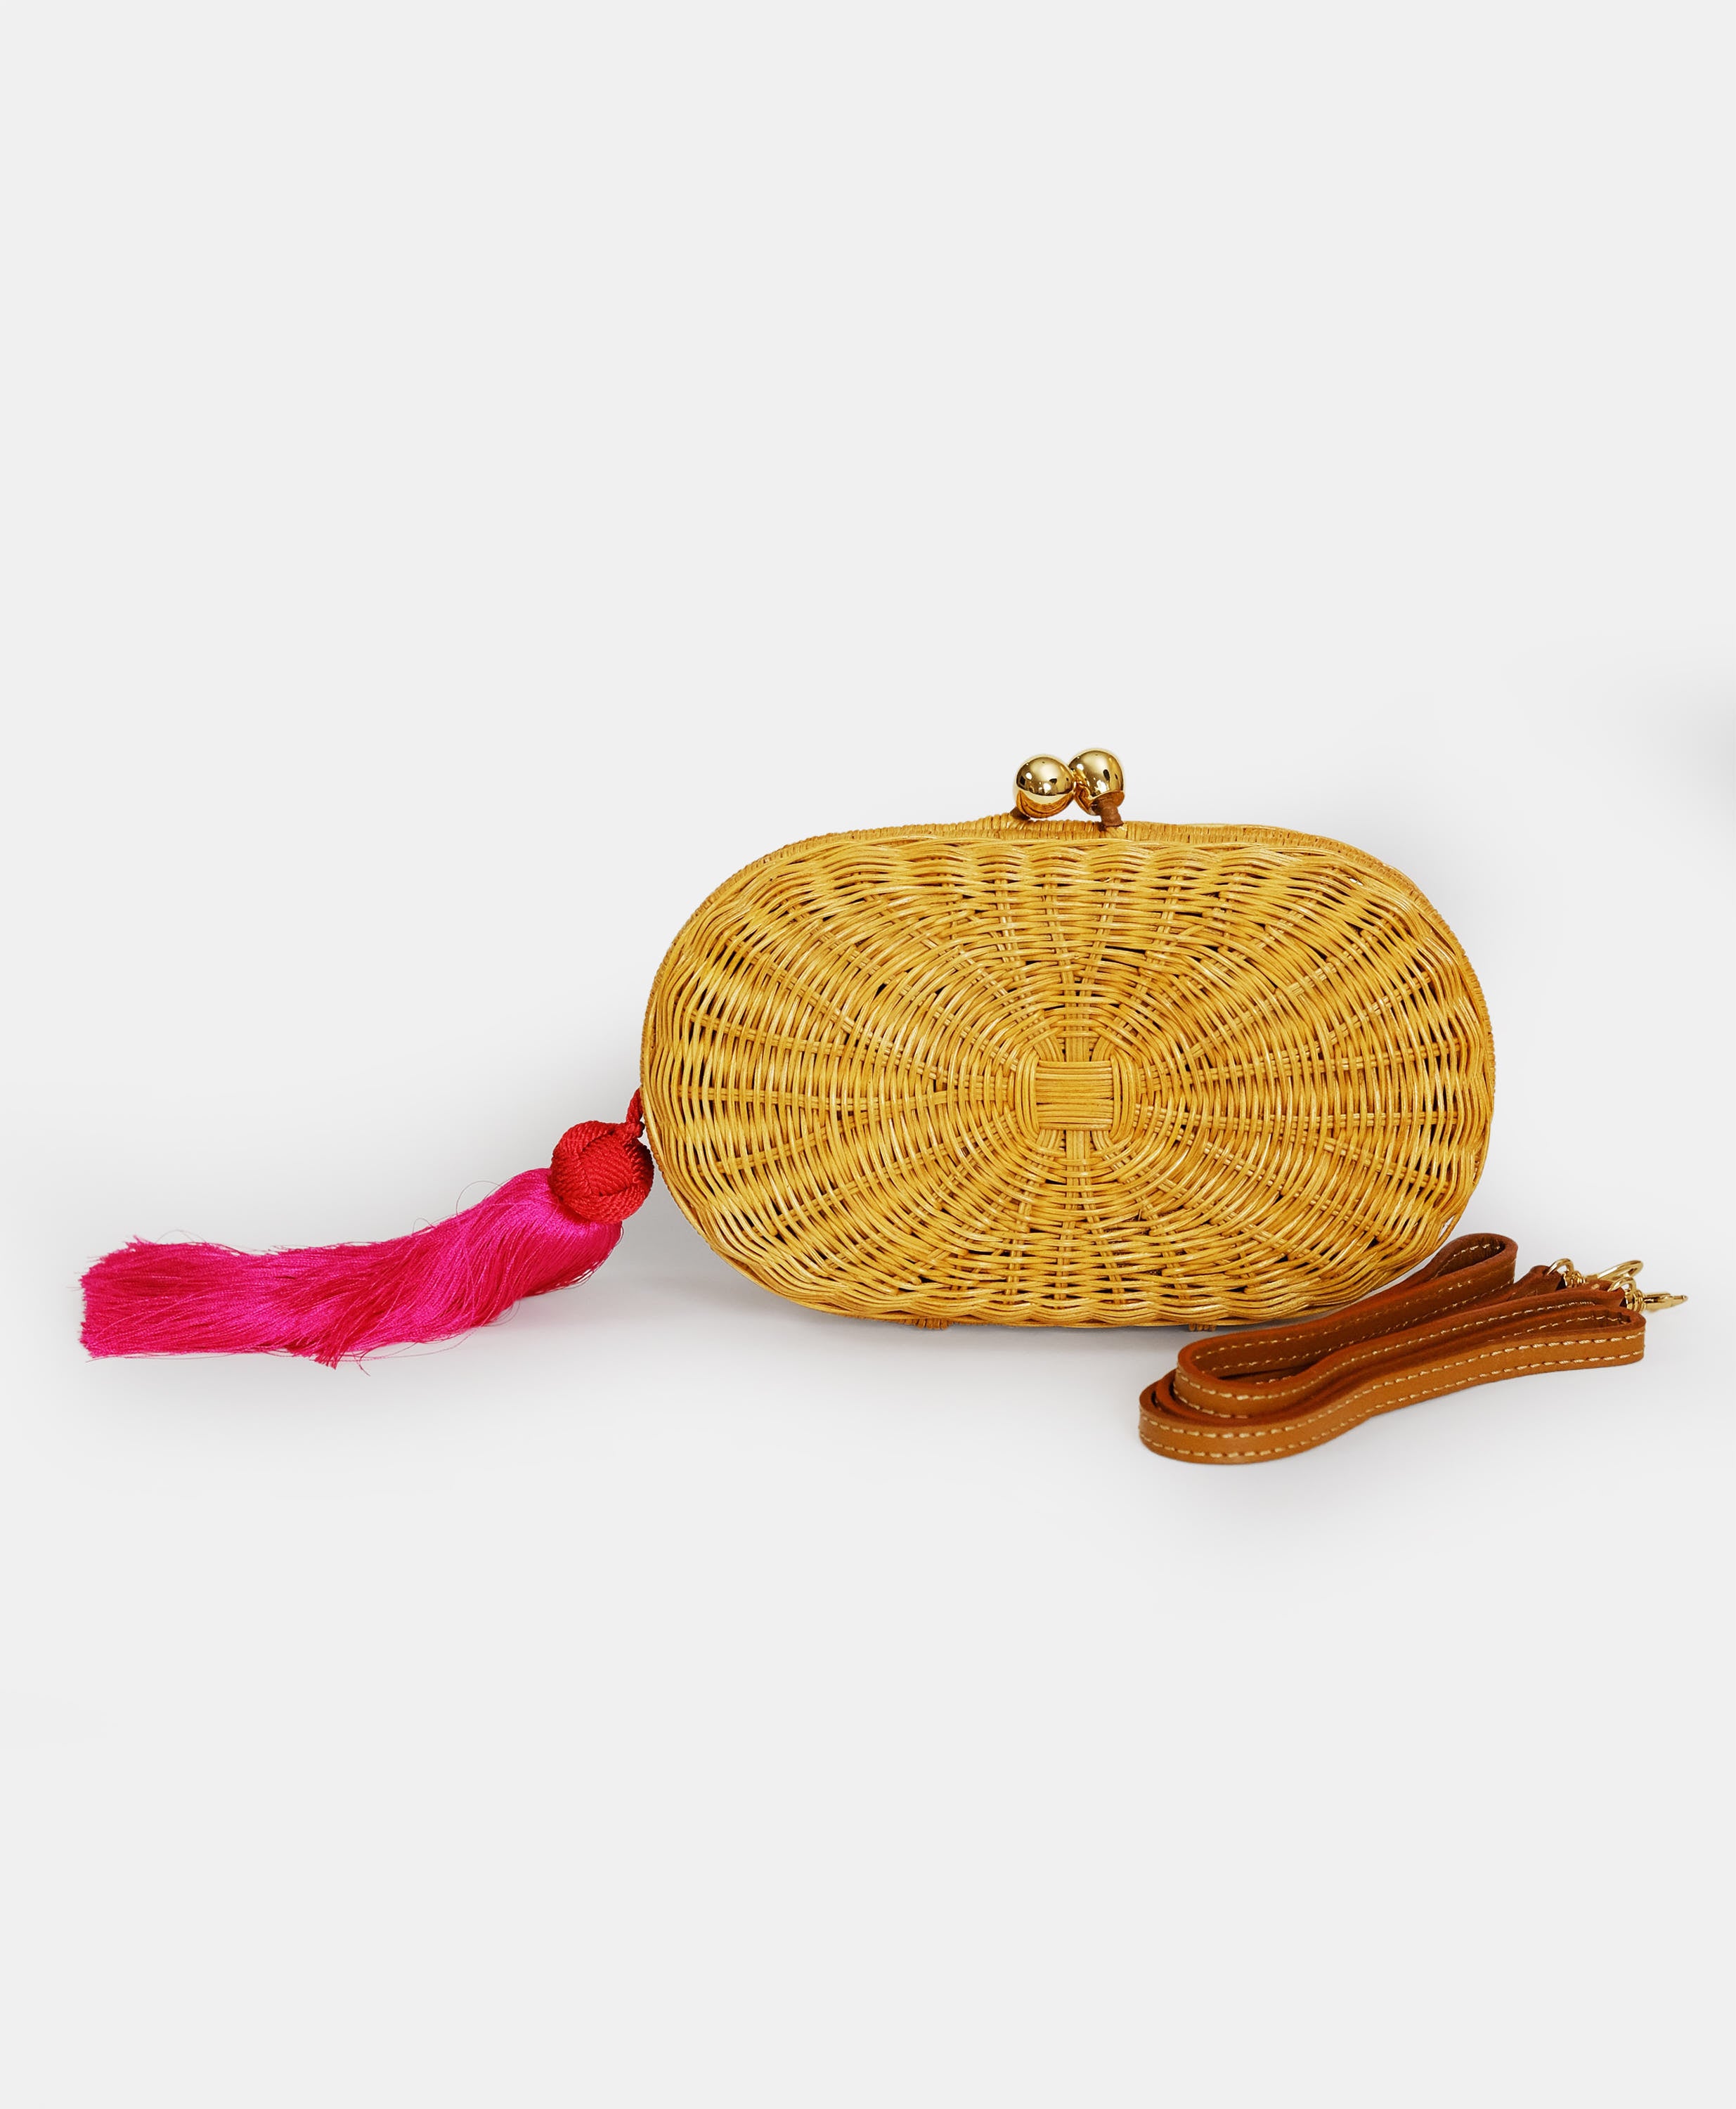 Serpui Watermelon Wicker Clutch Bag  Urban Outfitters Japan - Clothing,  Music, Home & Accessories